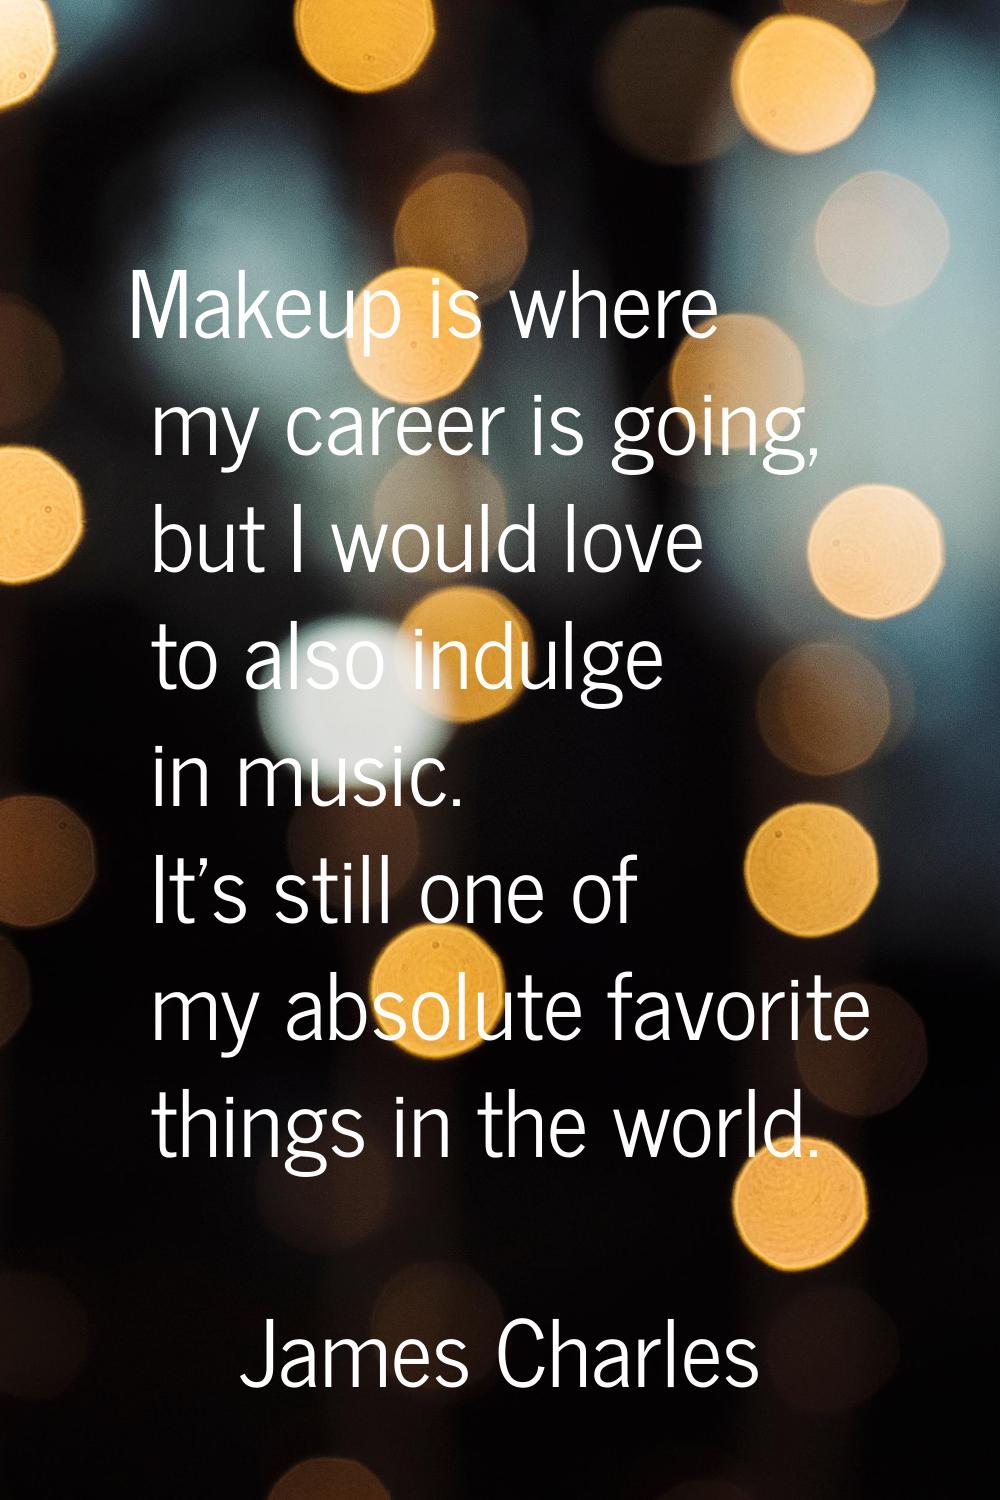 Makeup is where my career is going, but I would love to also indulge in music. It's still one of my